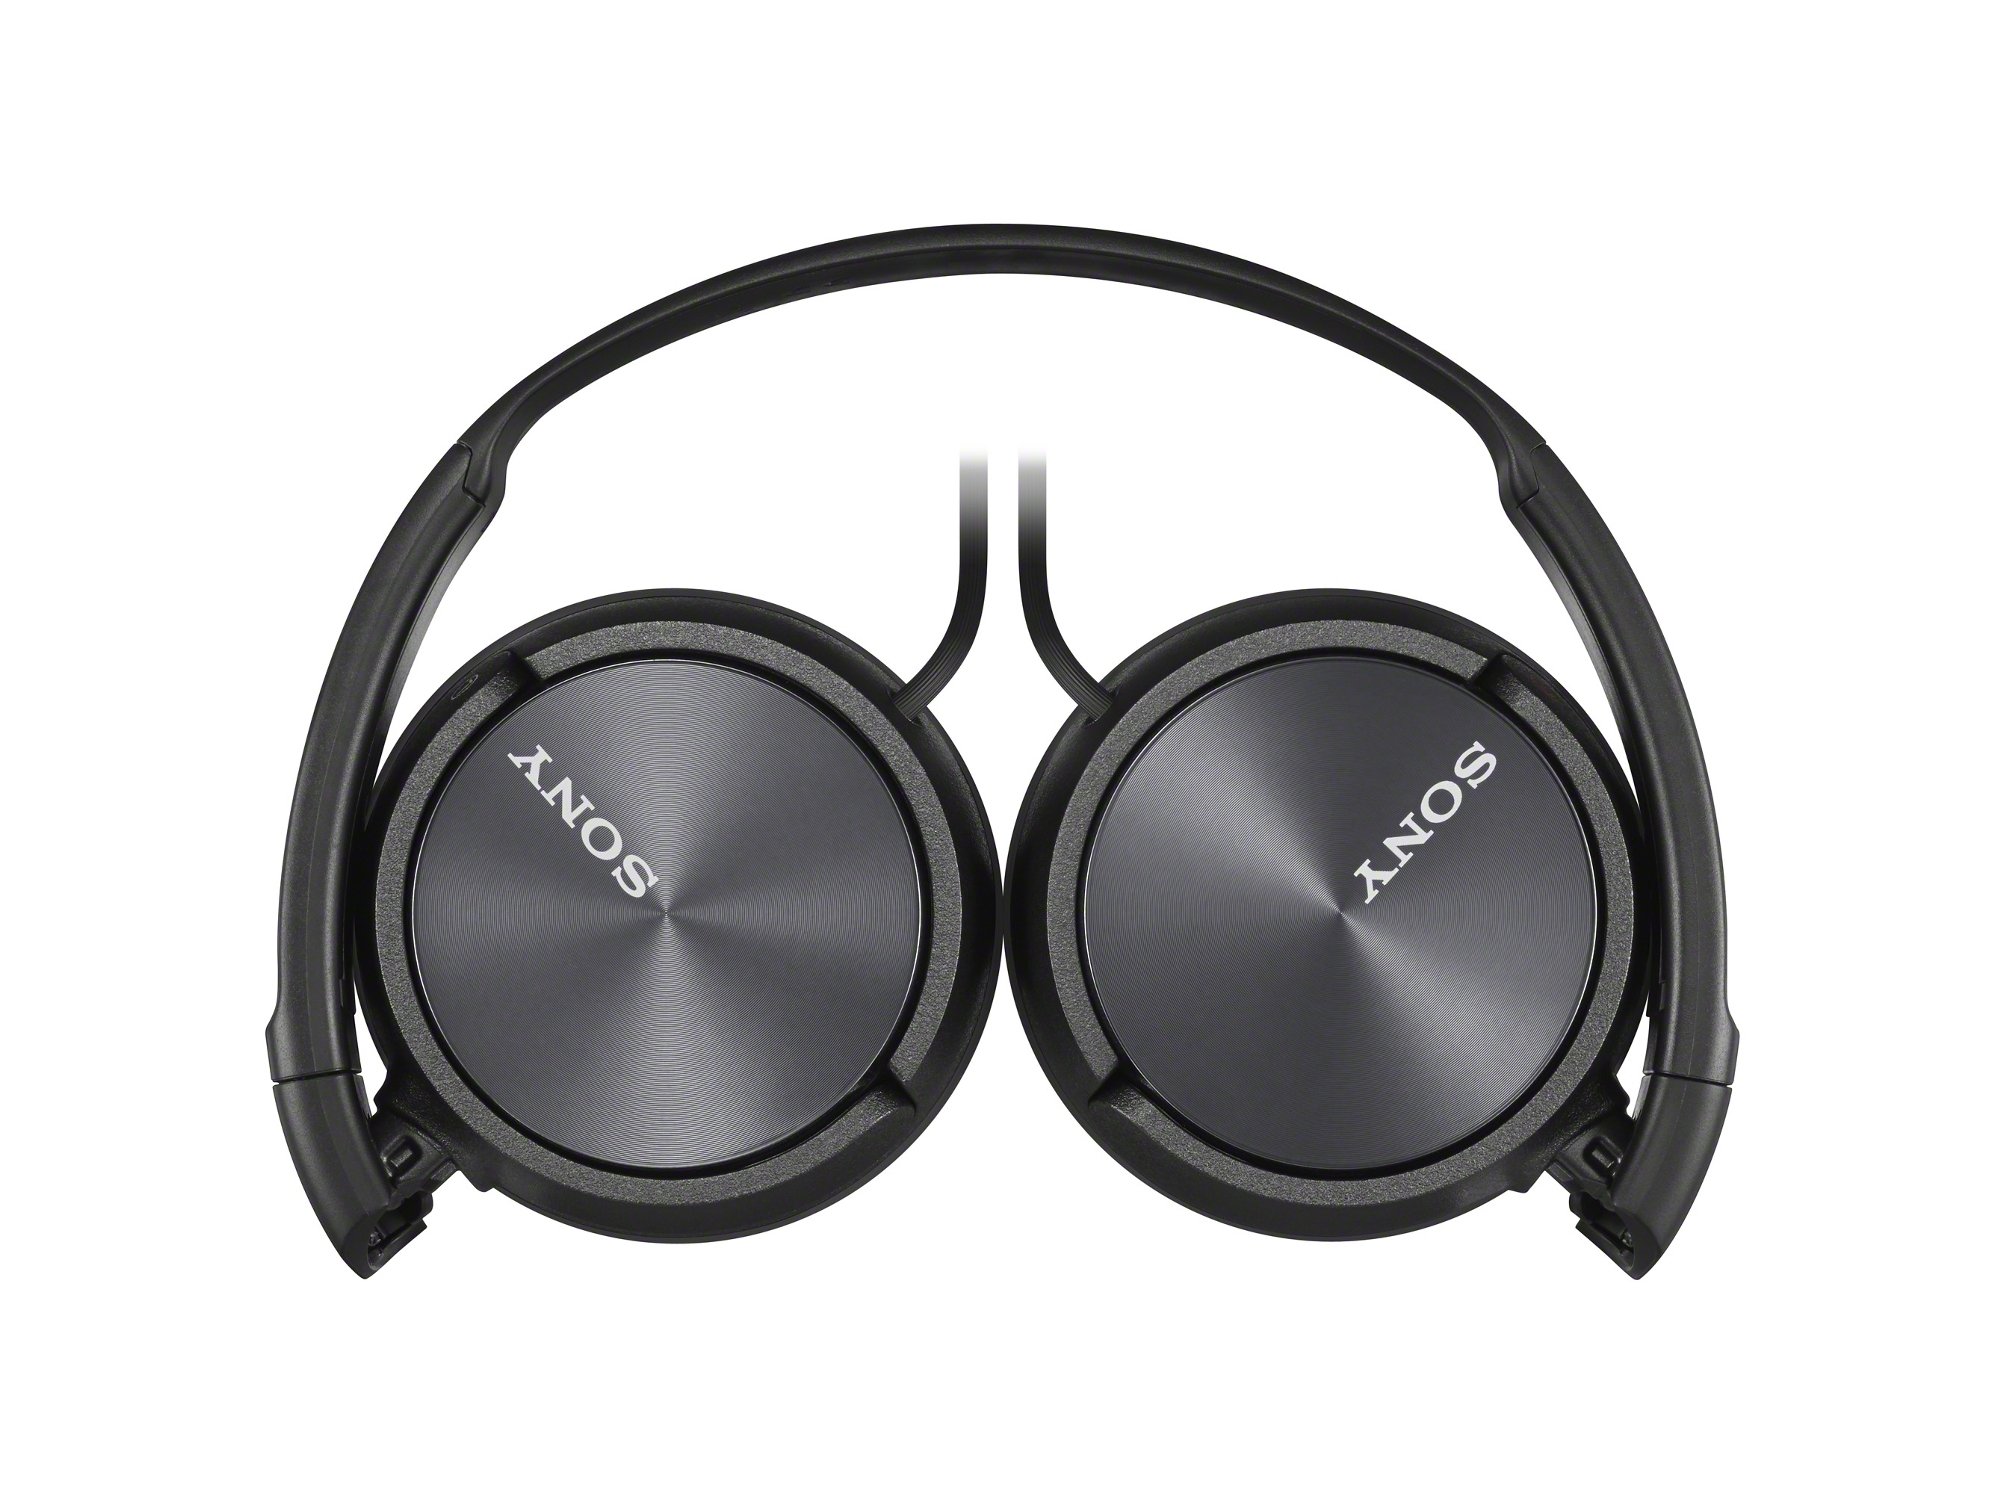 Auriculares con Cable SONY Mdrzx310Ap (On Ear - Negro)